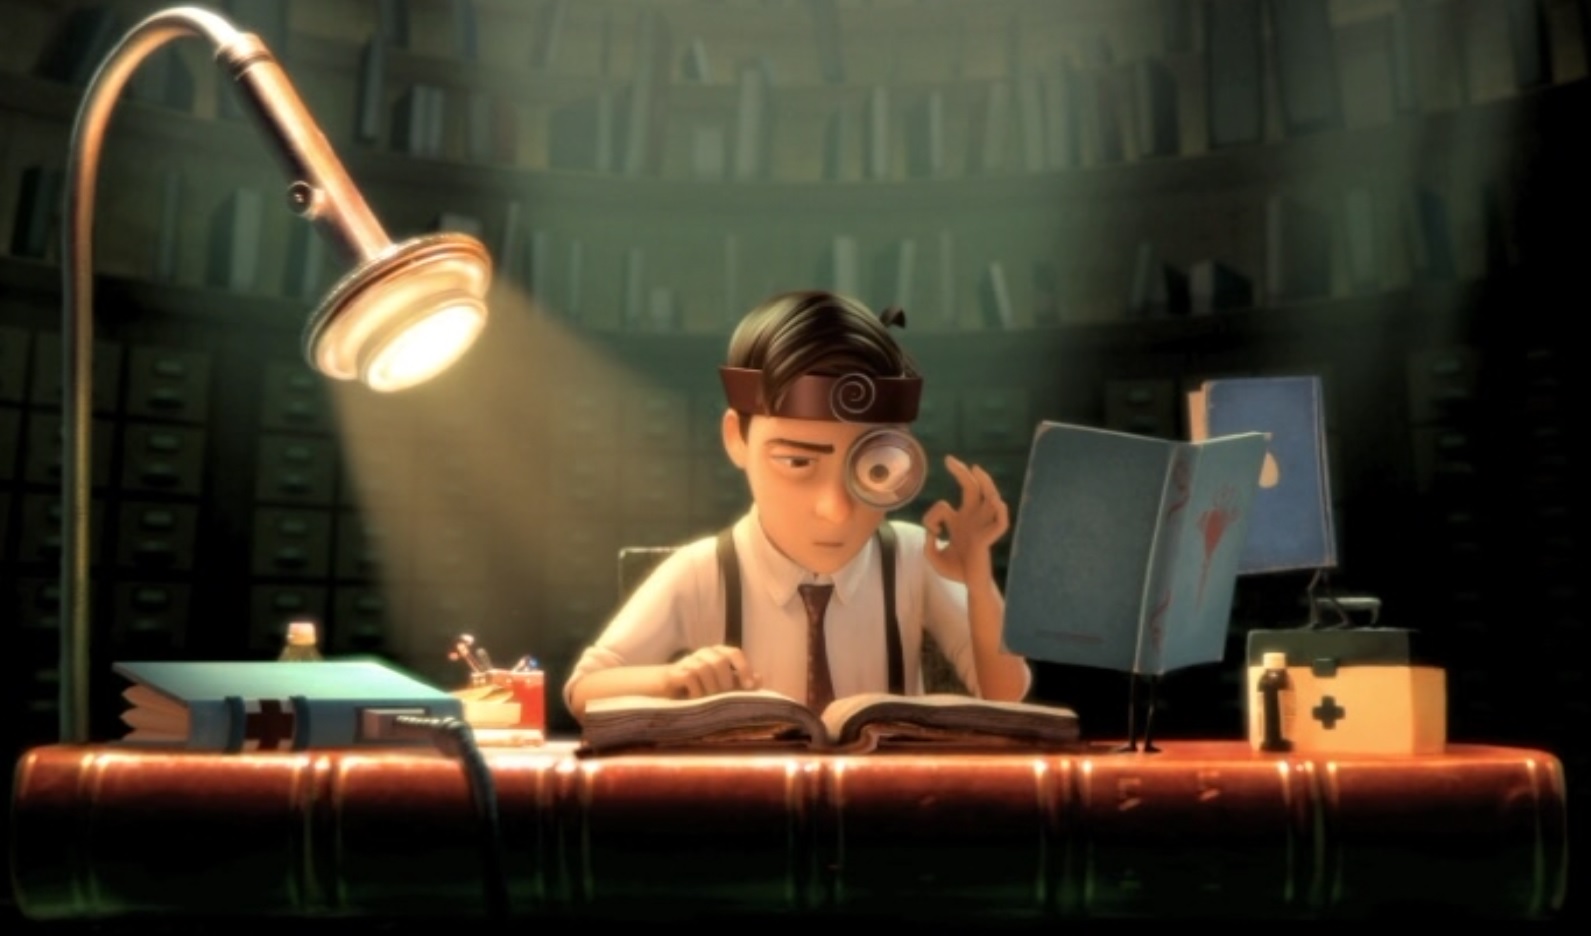 literature | Dr. Grob's Animation Review